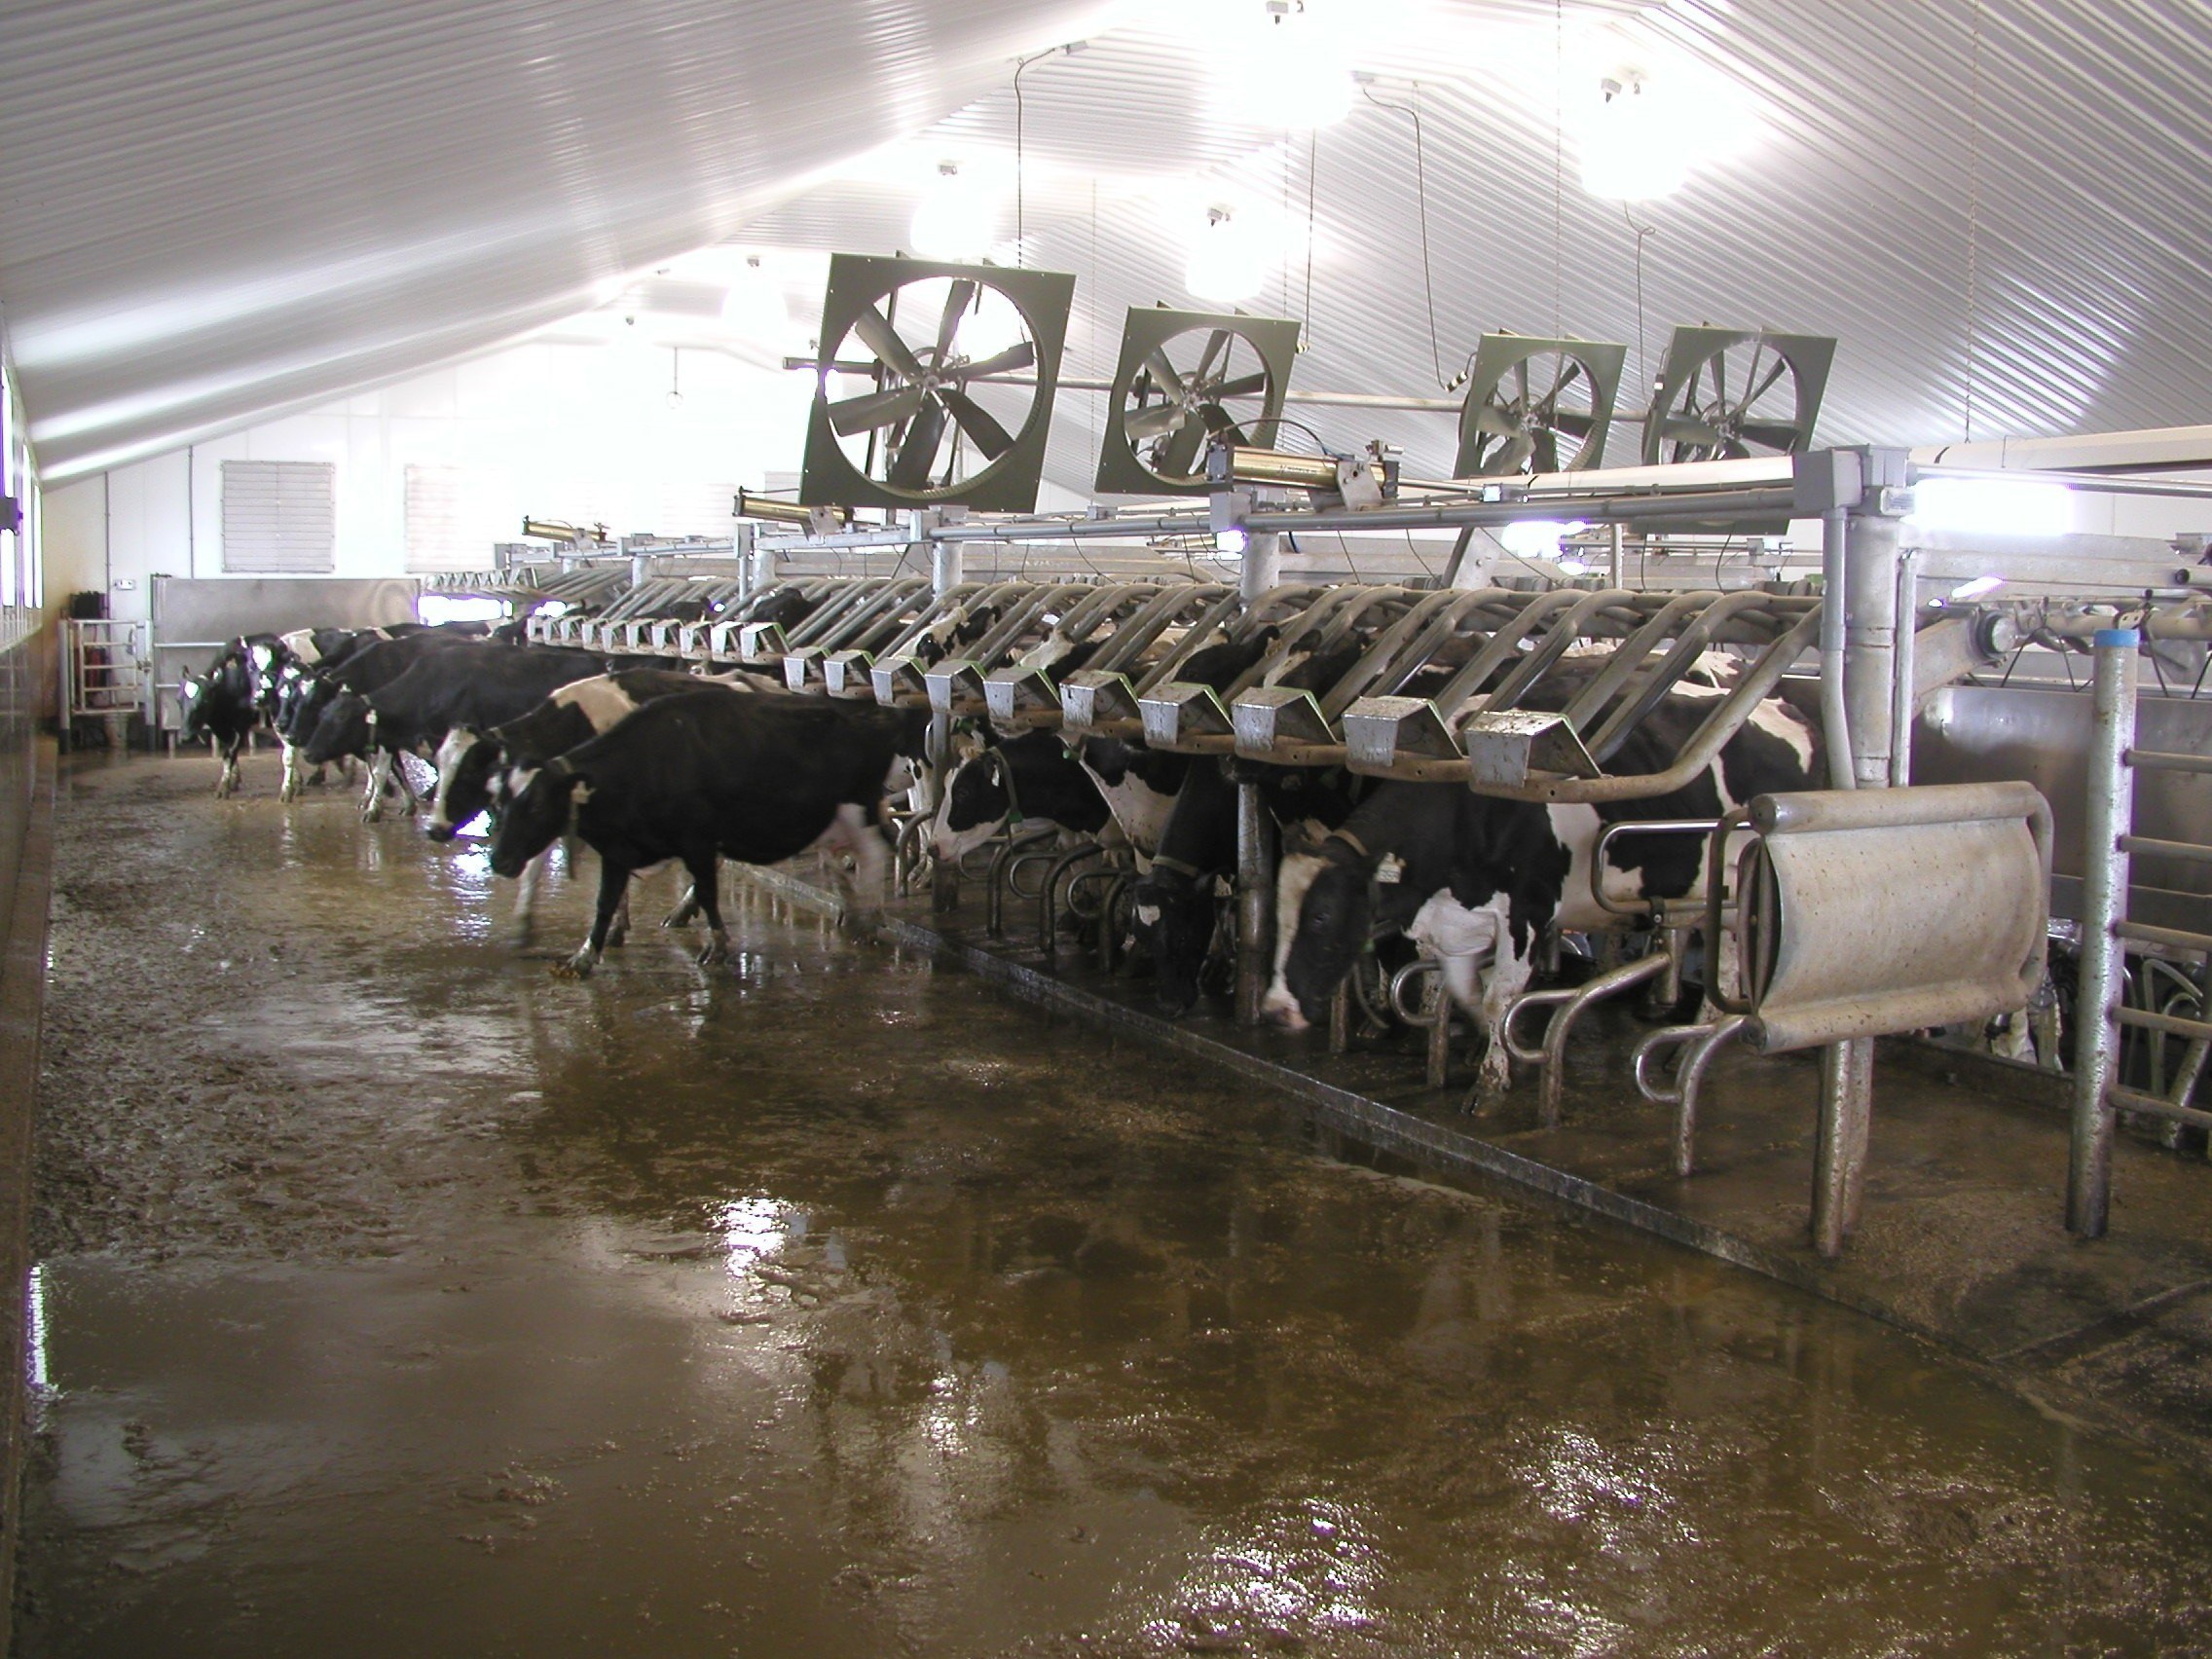 Gates open after milking is complete